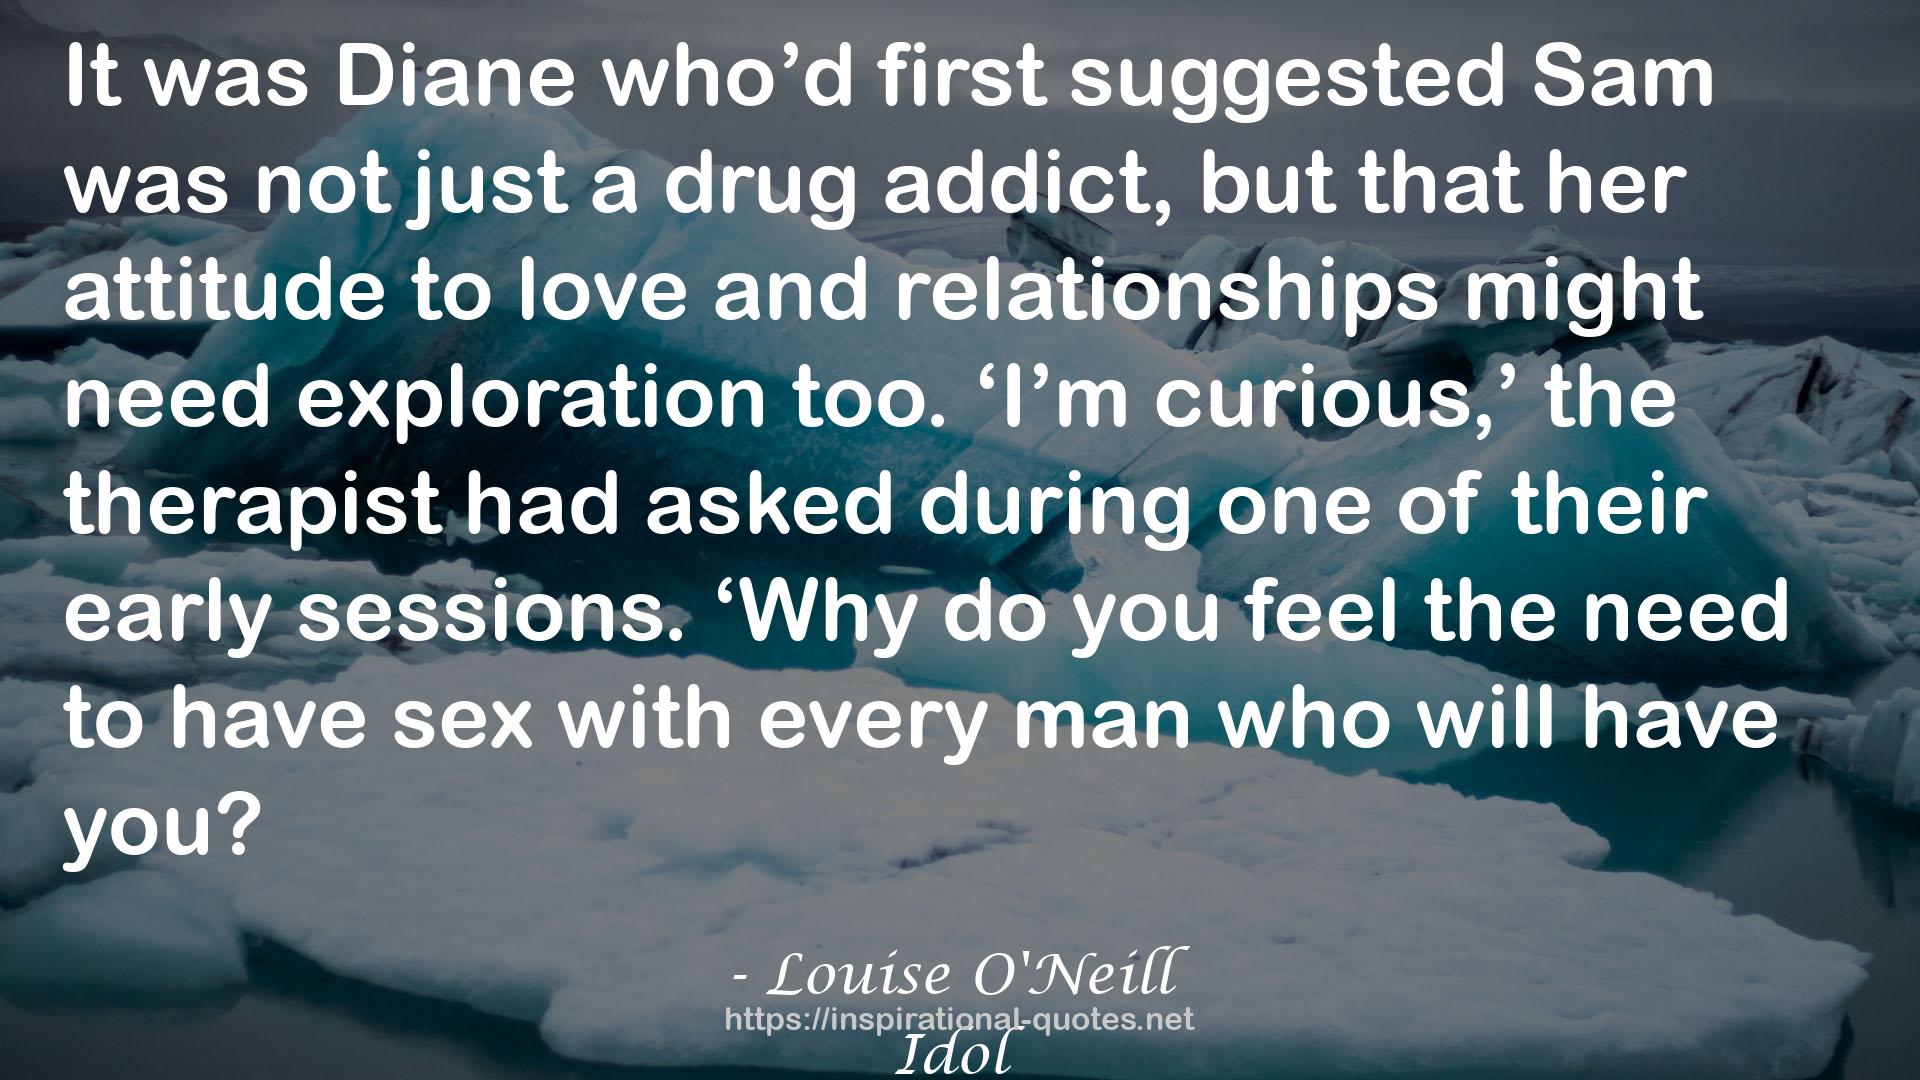 Louise O'Neill QUOTES